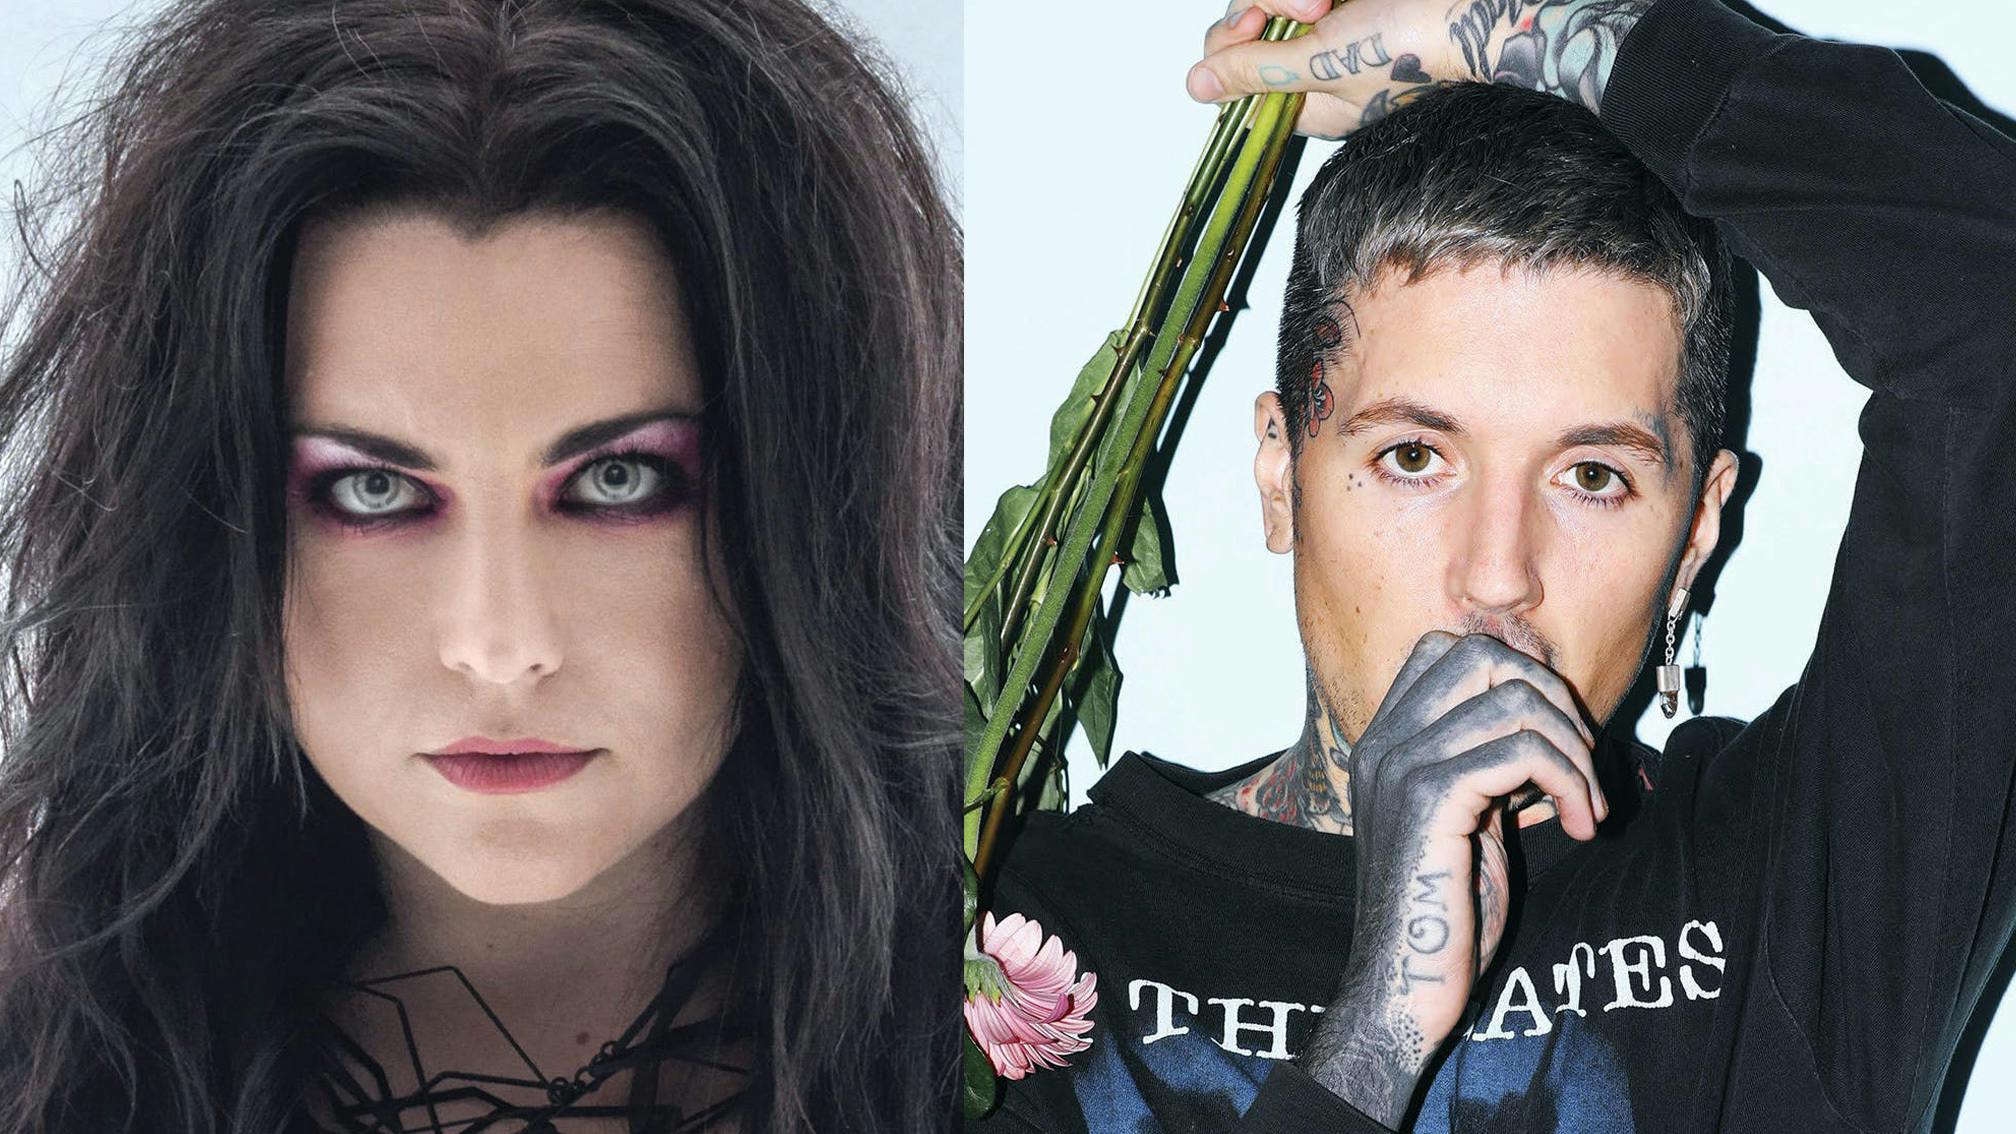 Hear Bring Me The Horizon's New Collaboration With Amy Lee